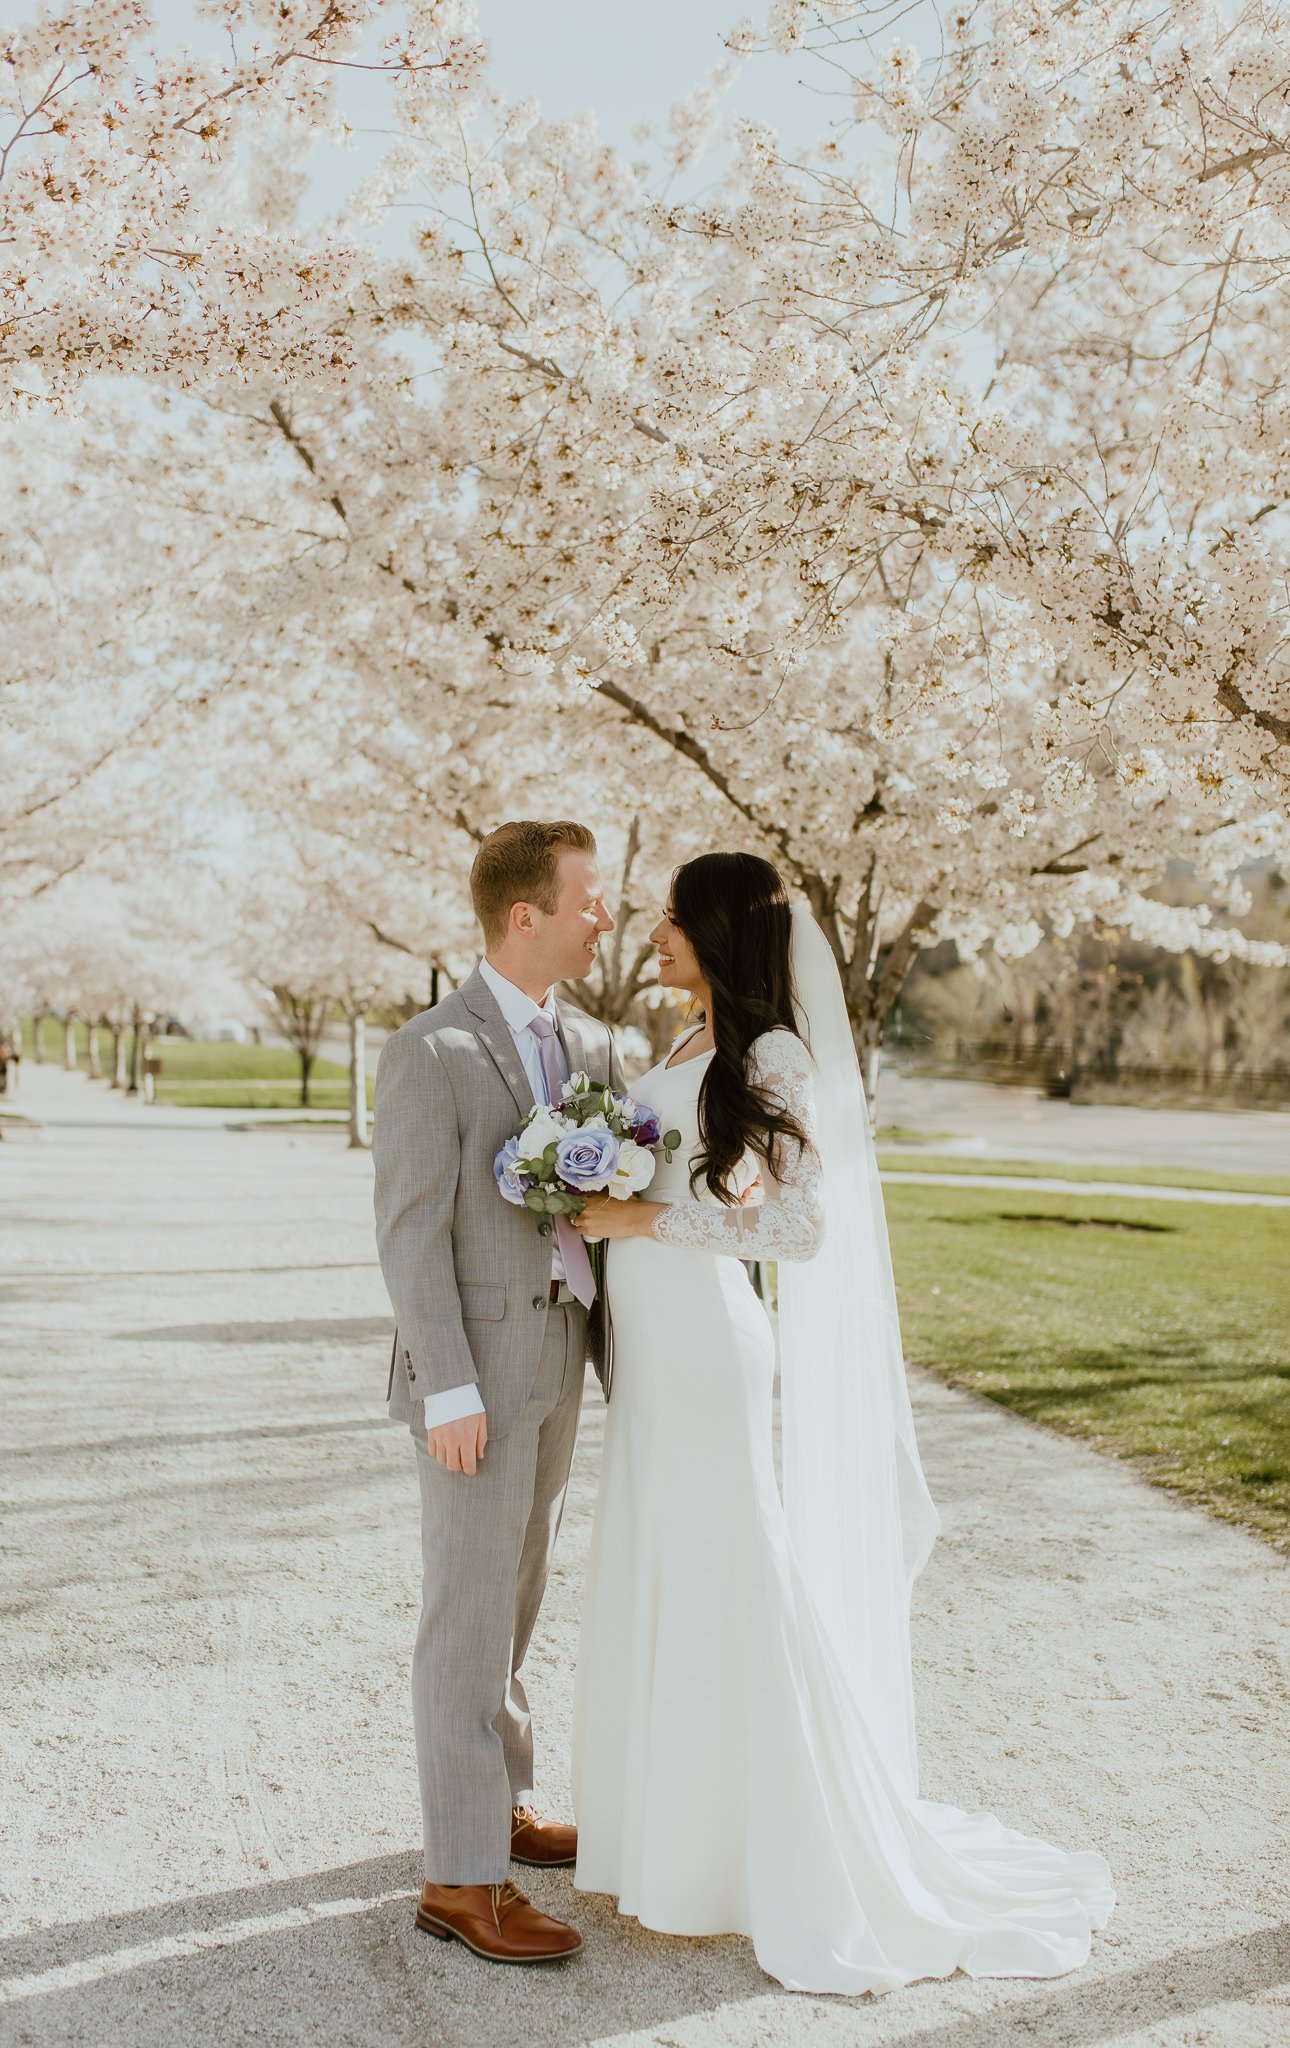 Utah-State-Capitol-Spring-Blossons-Bountiful-LDS-Wedding-Hopesandcheers-photo-2